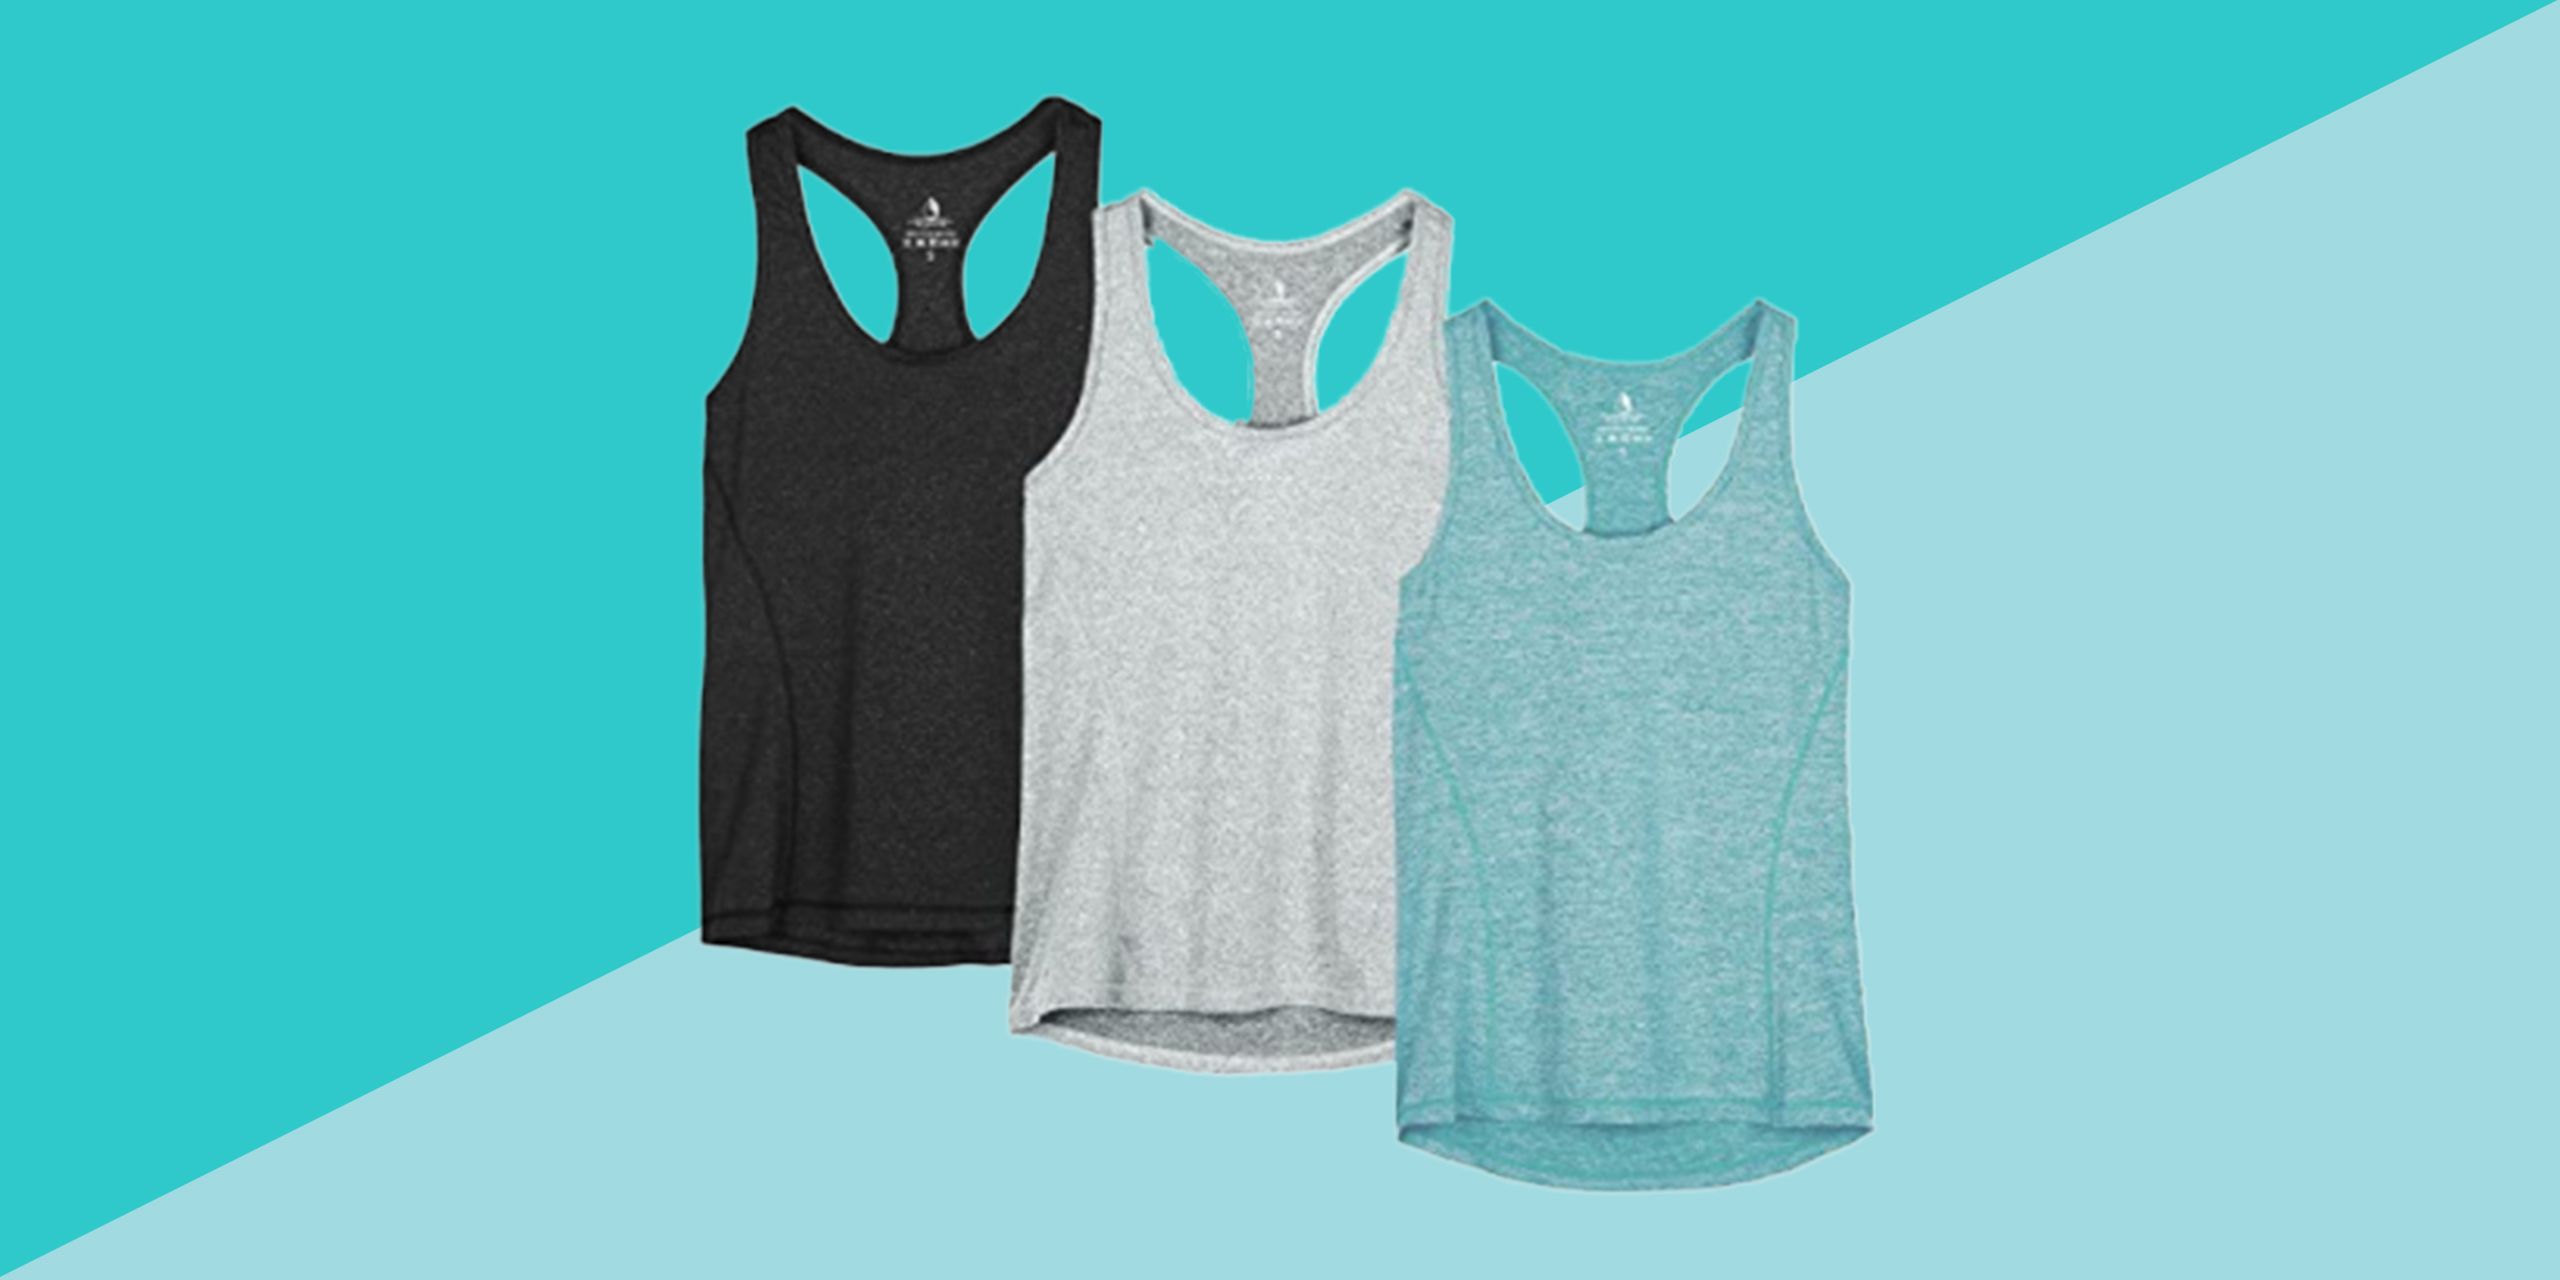 The 17 Best Workout Tops for Women - Best Exercise Tops